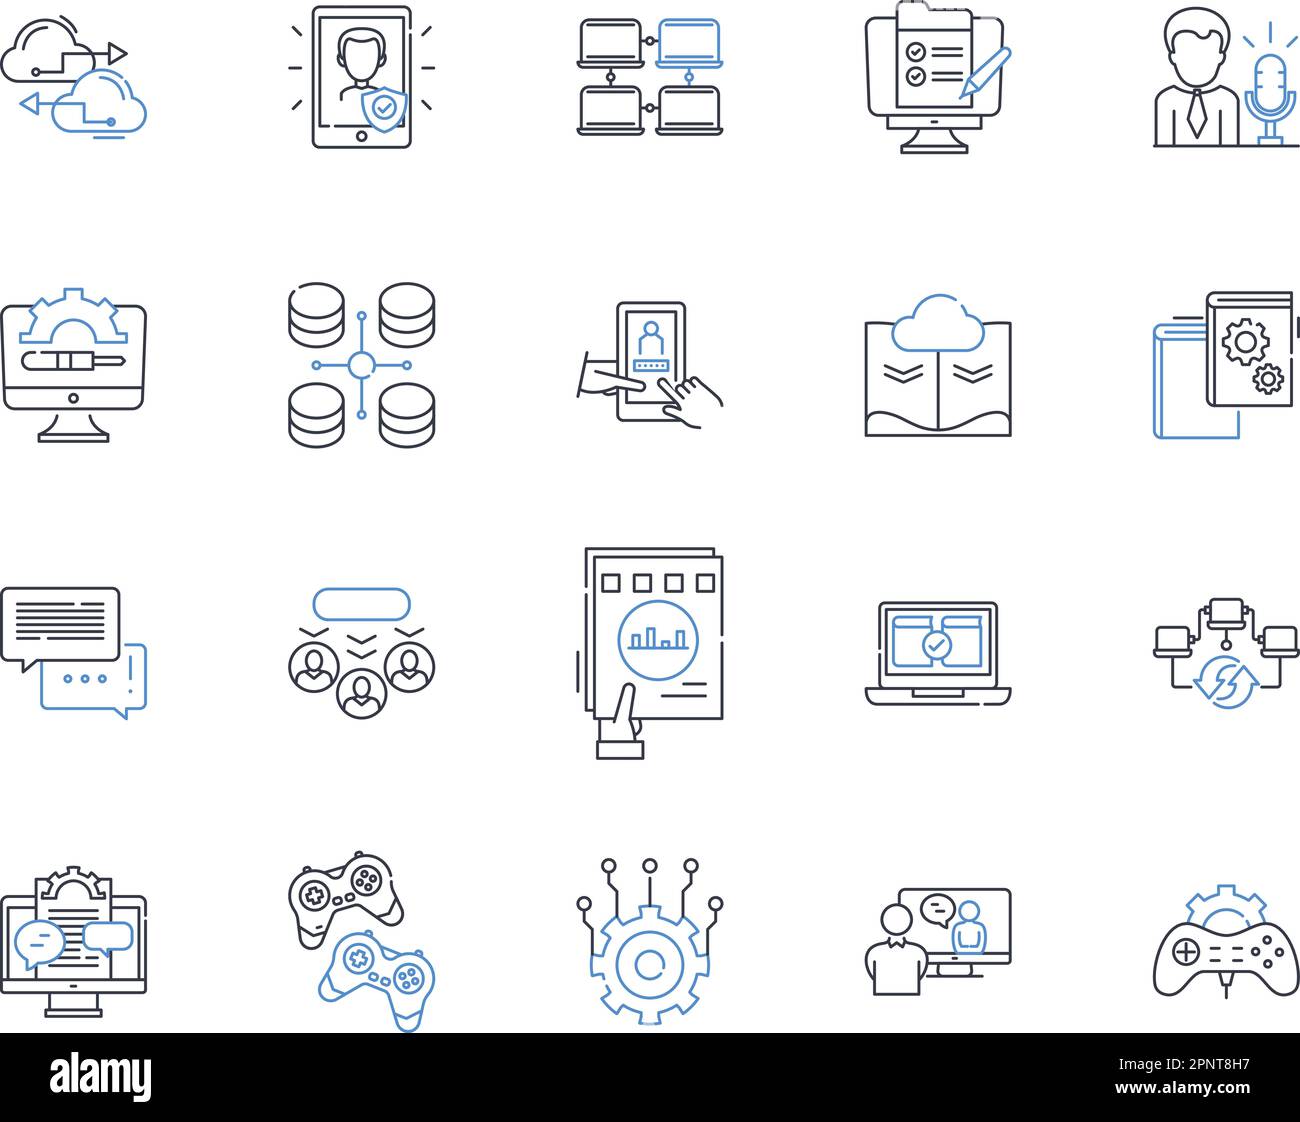 Information device line icons collection. Smartph, Tablet, Laptop, Desktop, Smartwatch, E-reader, Gaming console vector and linear illustration Stock Vector